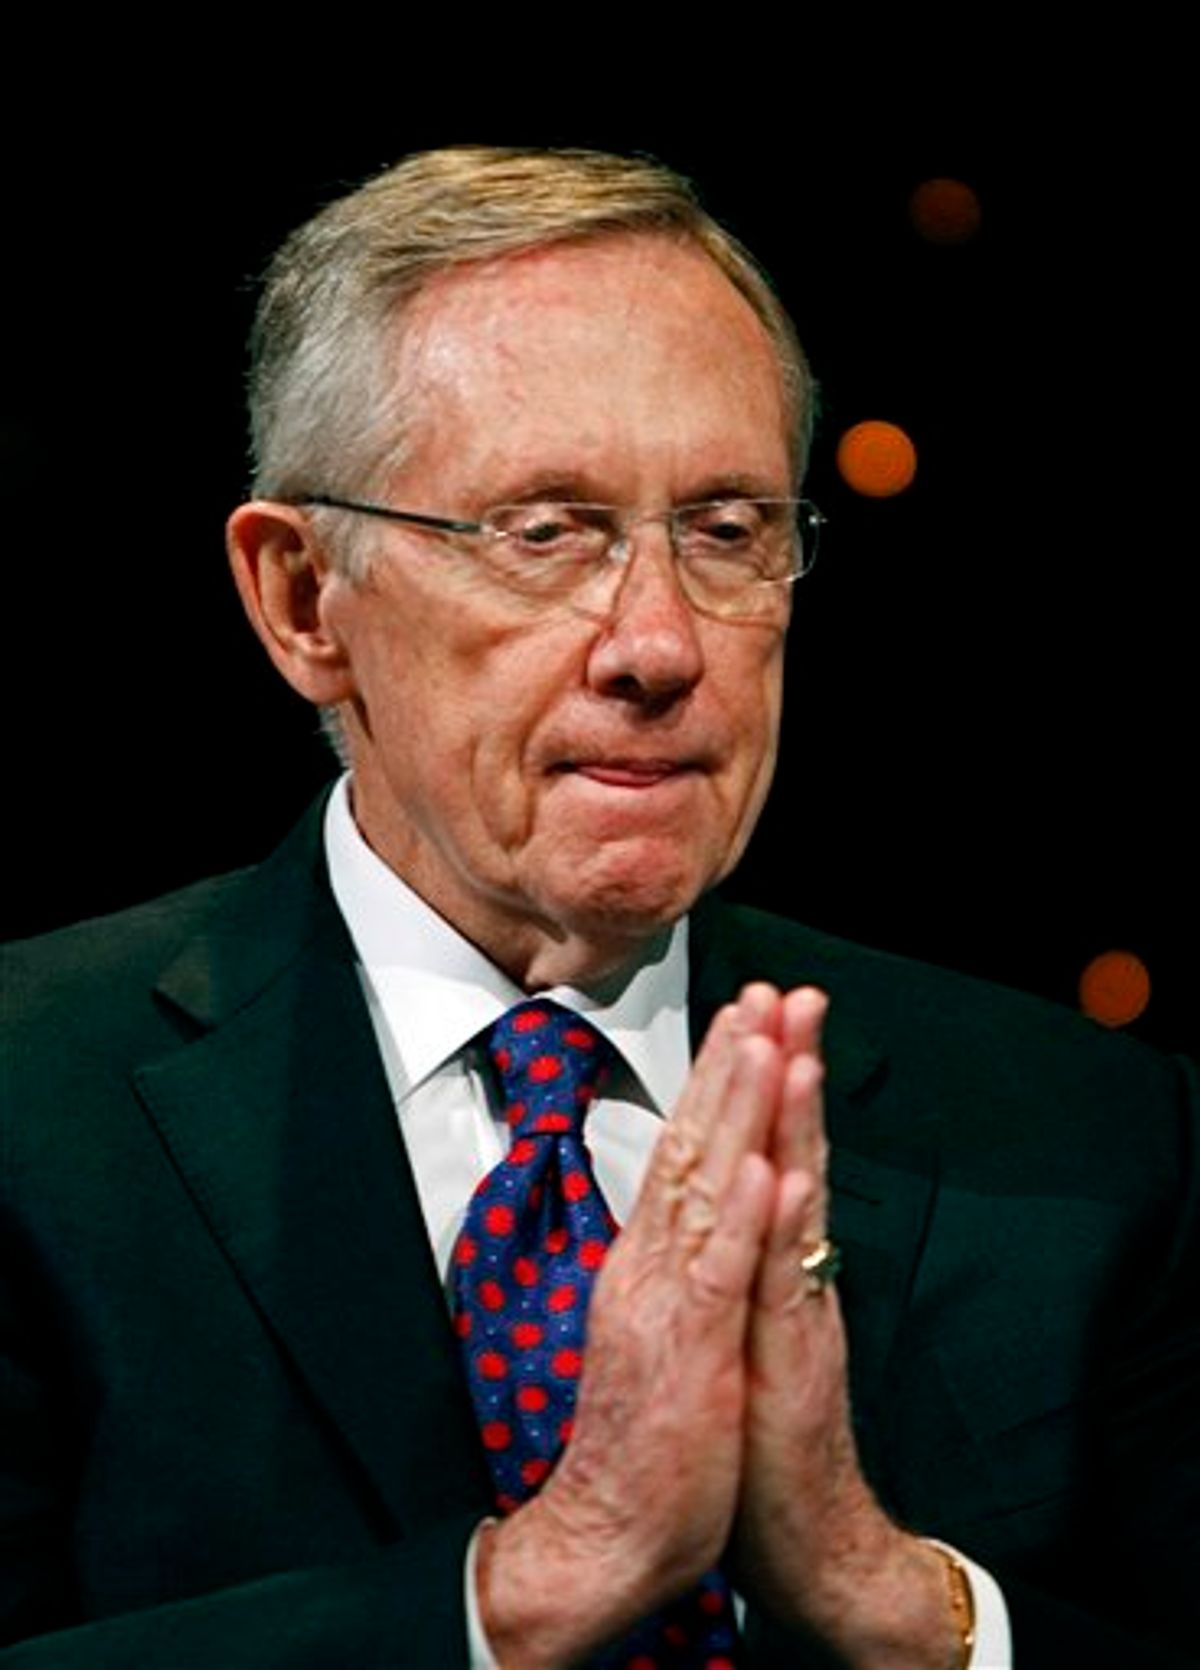 Sen. Harry Reid answers questions during the Netroots Nation convention at the Rio Hotel and Casino in Las Vegas on Saturday, July 24, 2010. Reid faces Republican and tea party favorite Sharron Angle this November in his bid to keep representing Nevada. (AP Photo/Louie Traub) (AP)